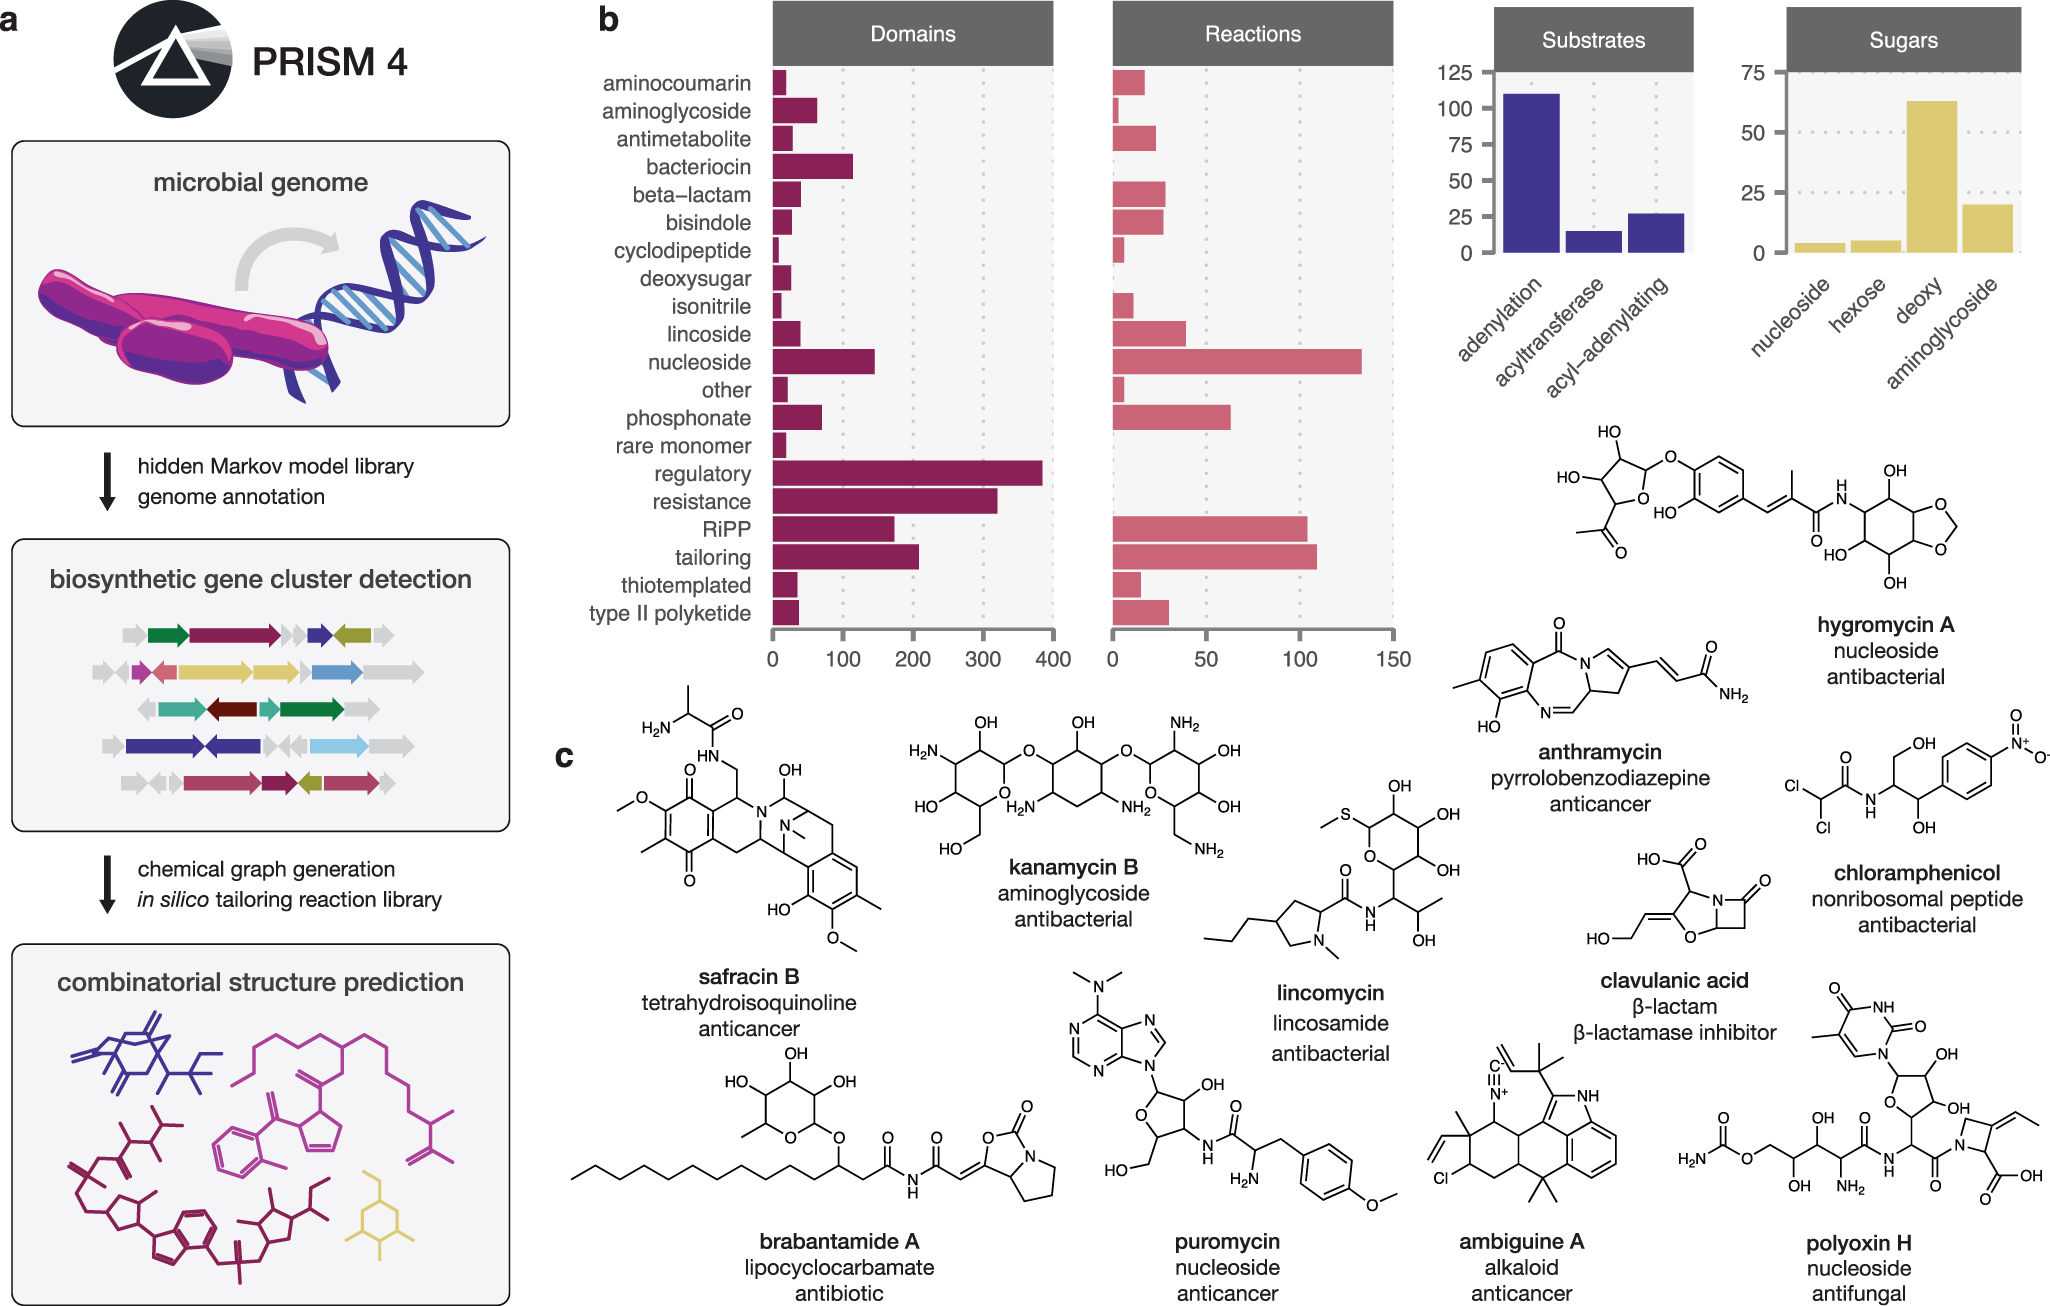 Comprehensive prediction of secondary metabolite structure and biological  activity from microbial genome sequences | Nature Communications